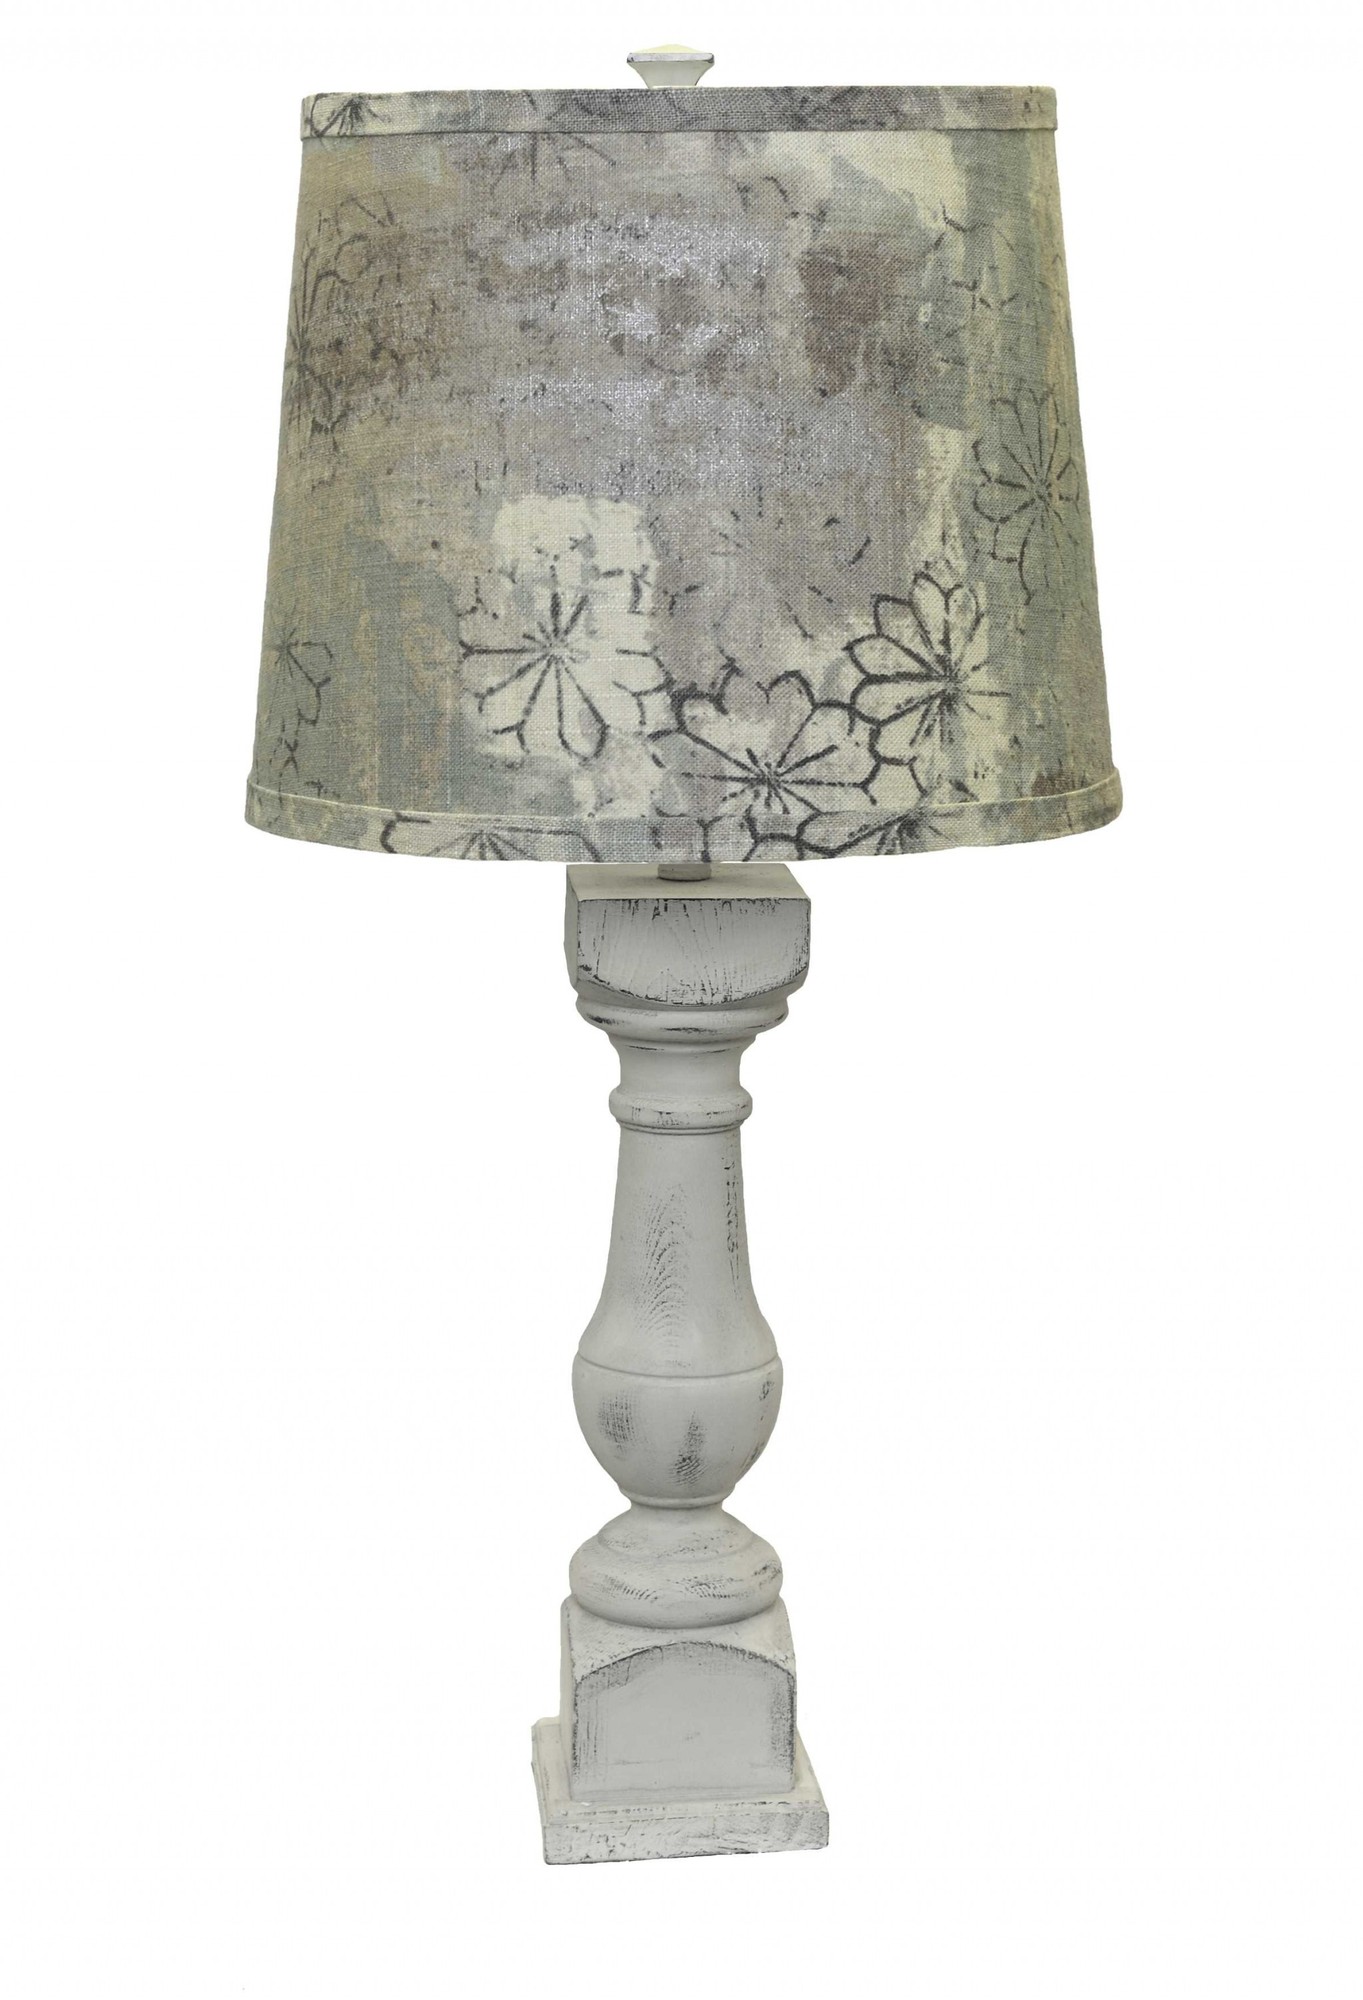 Distressed White Traditional Table Lamp with Patterned Shade